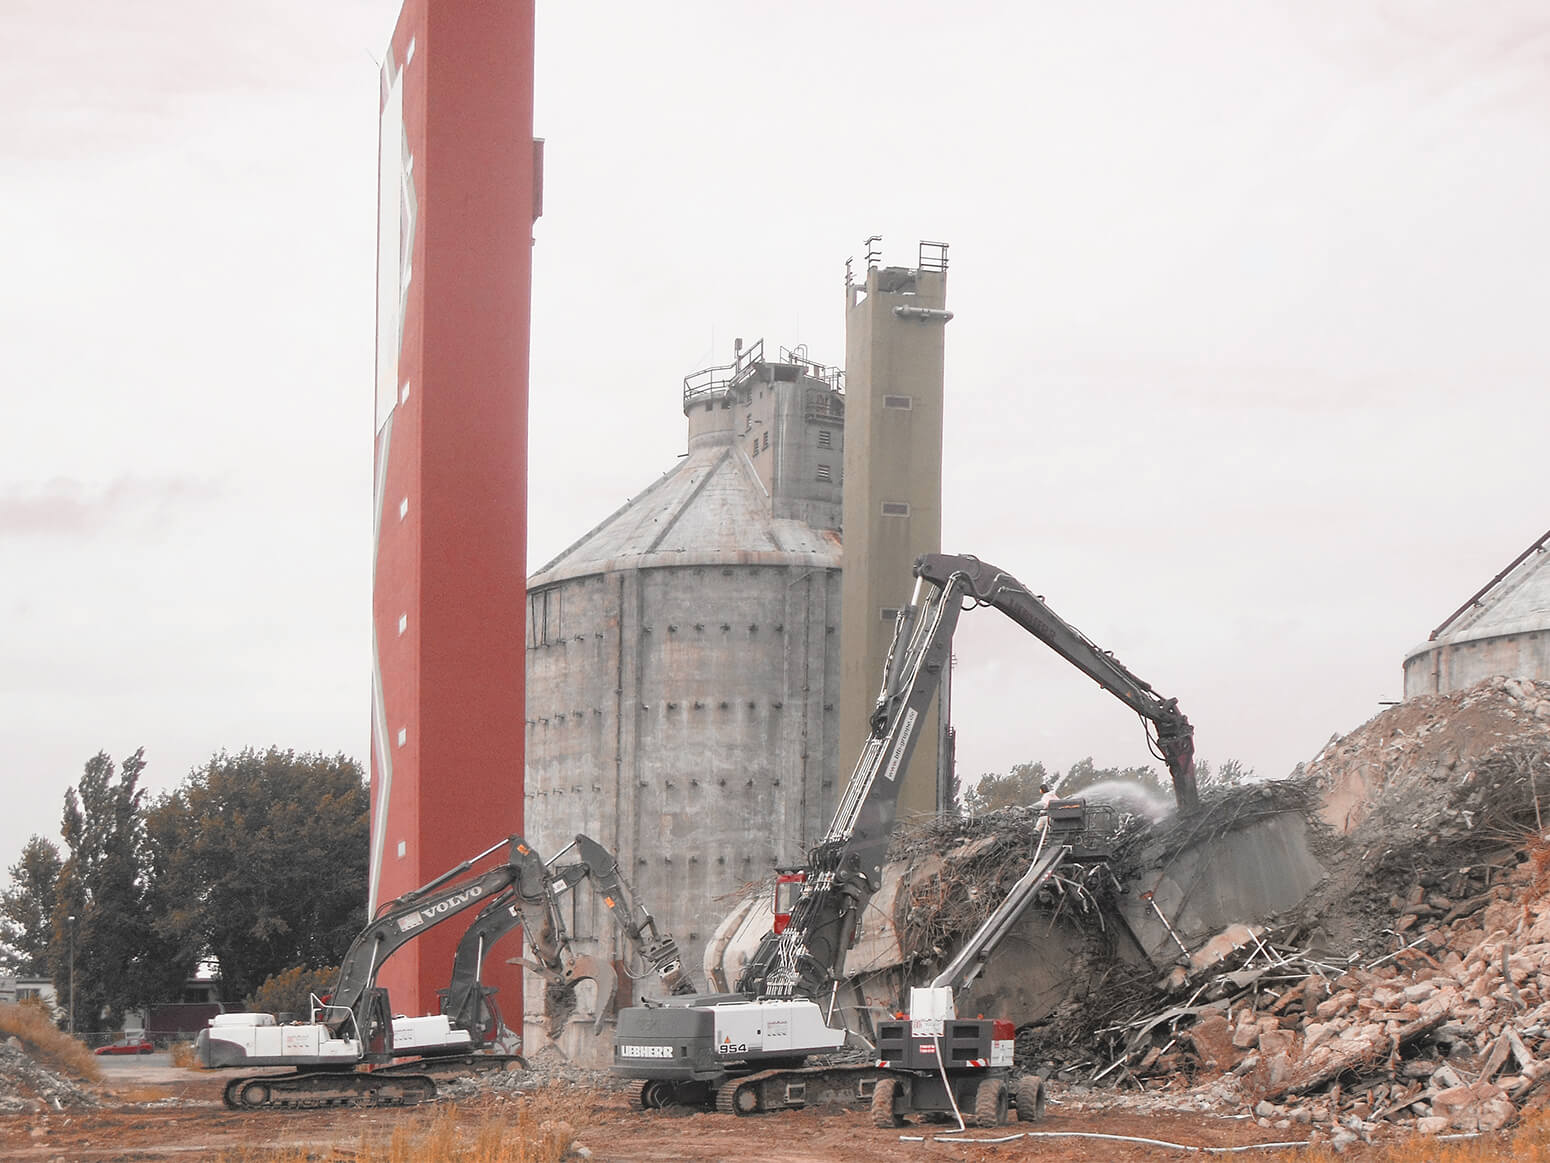 Several heavy construction vehicles tear down buildings made of reinforced concrete with two old digester towers in the background